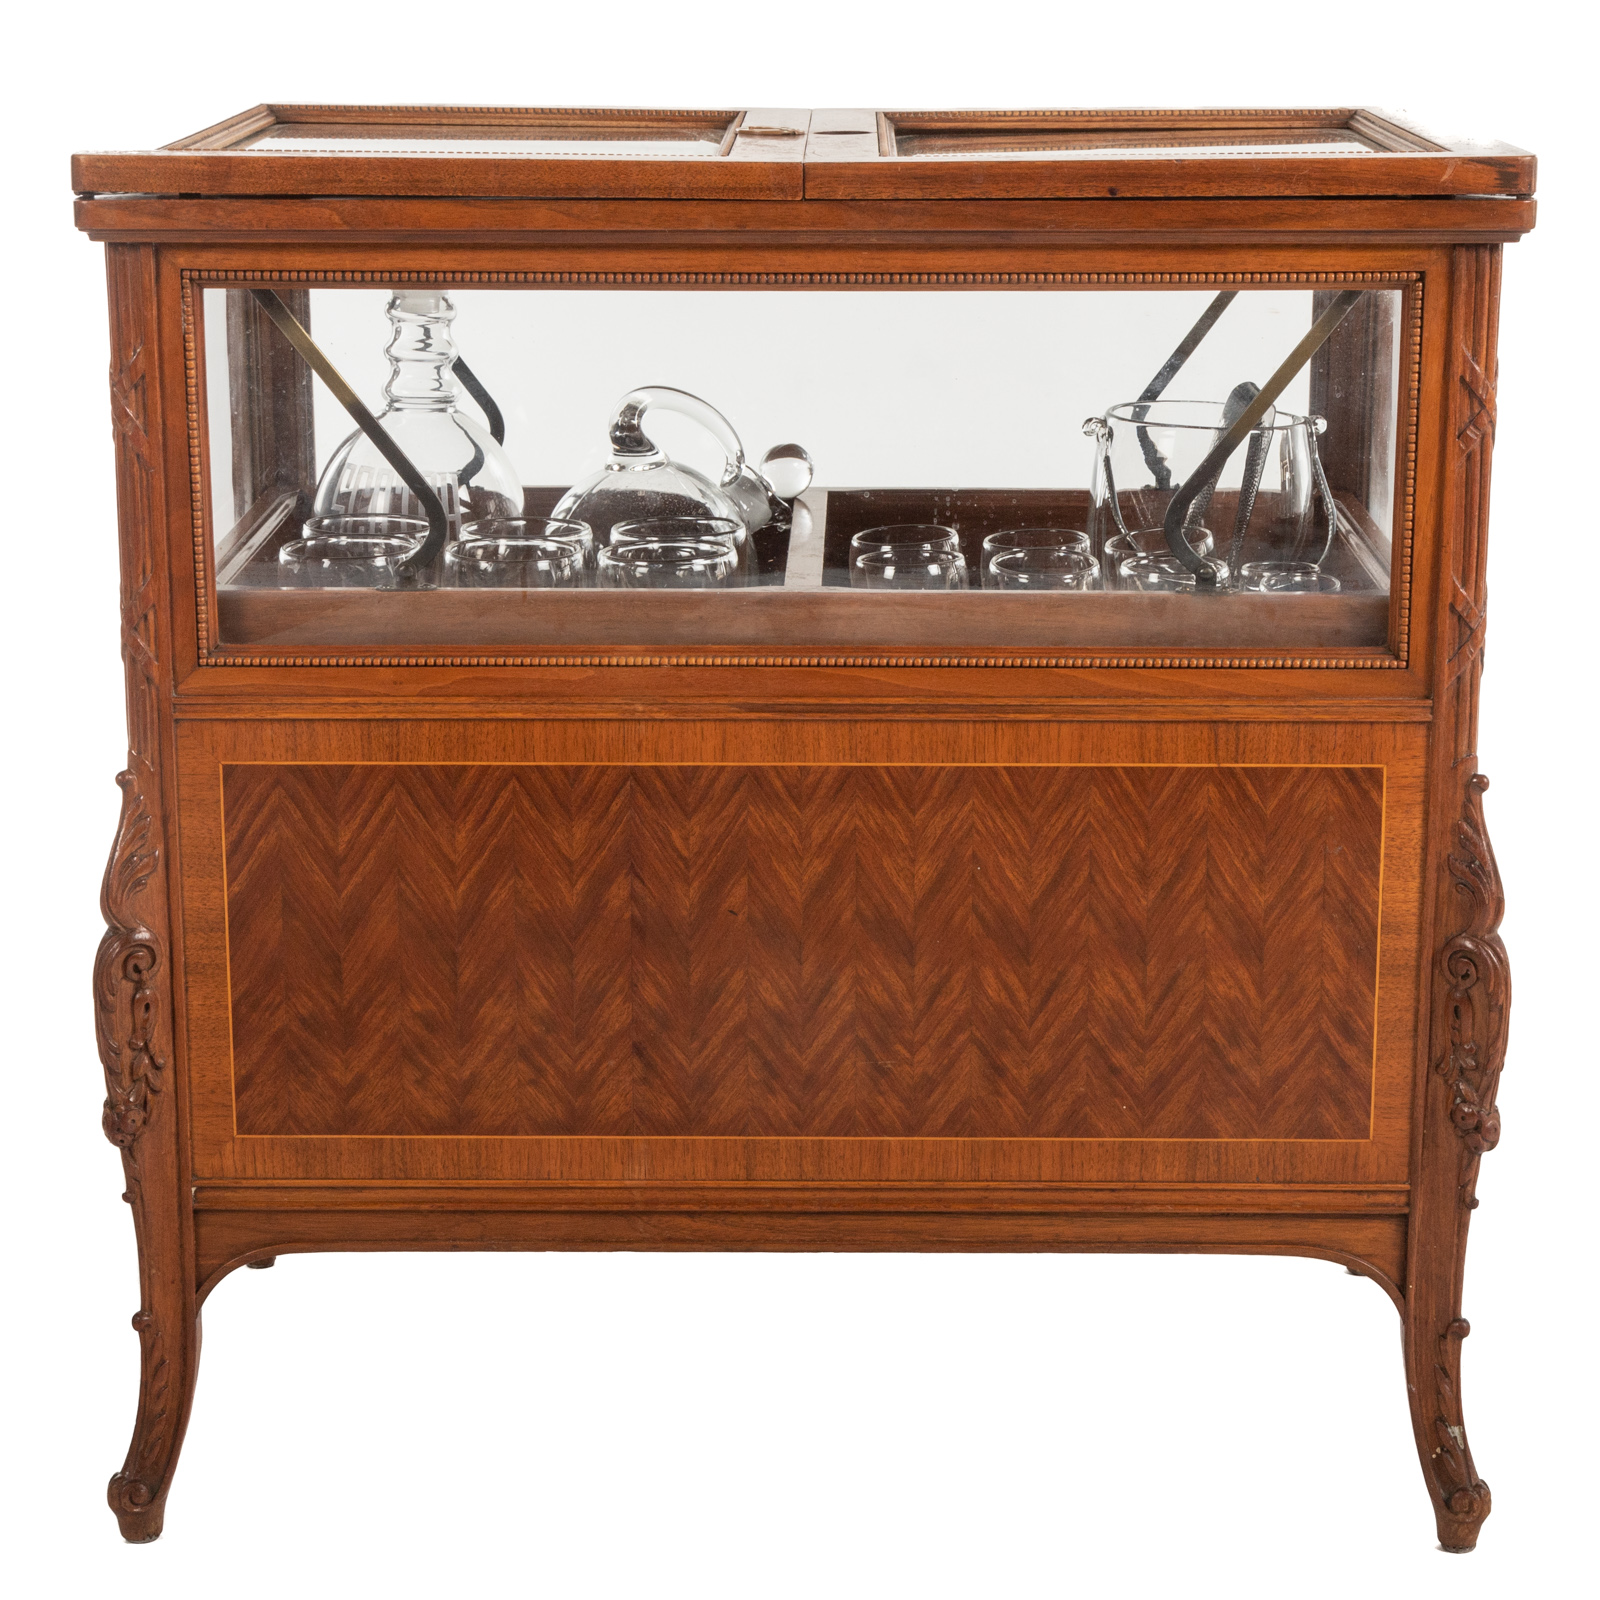 LOUIS XV STYLE BAR CABINET 20th